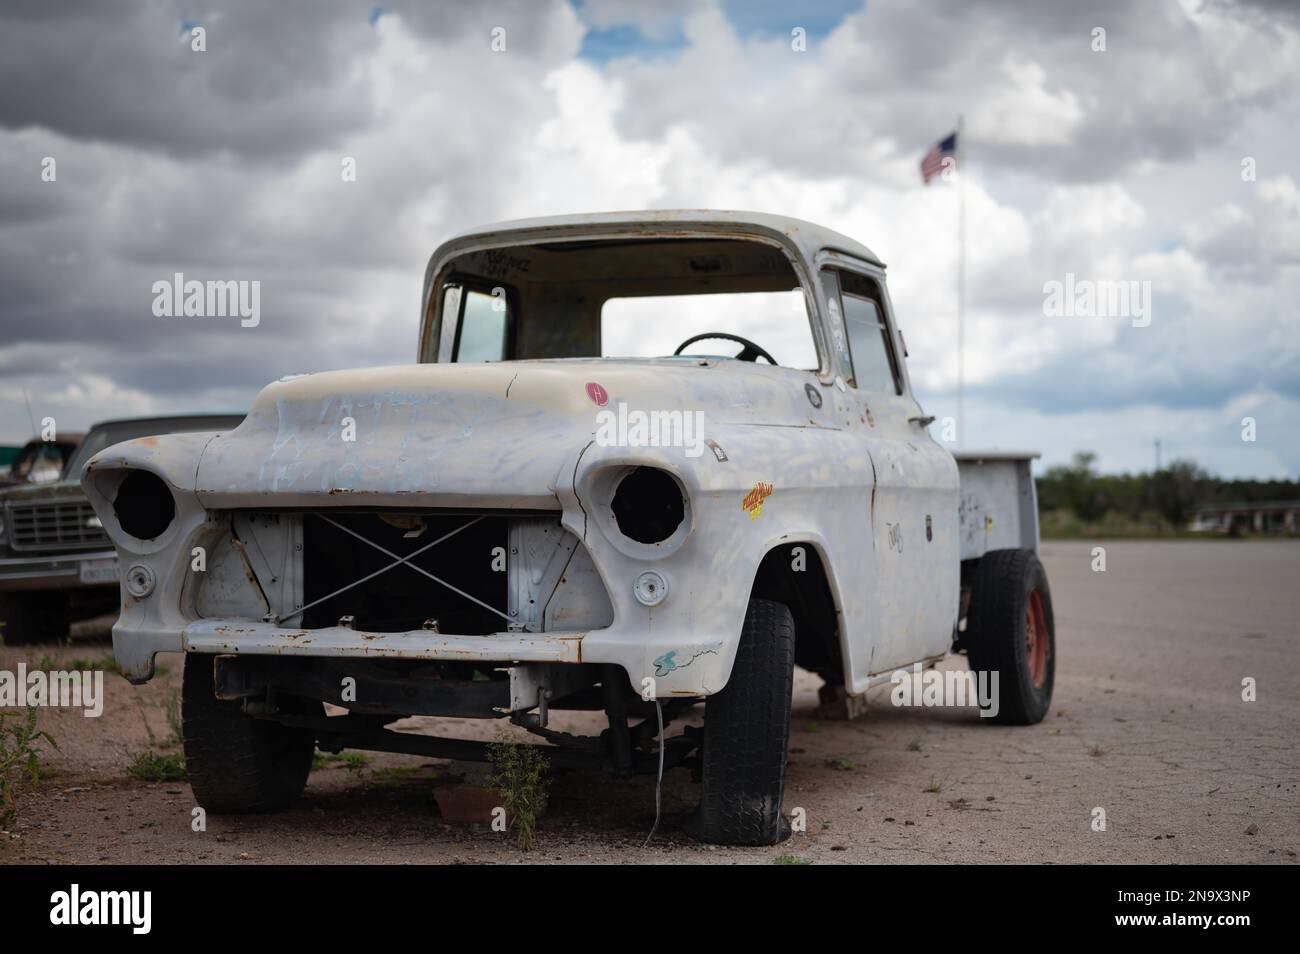 An old abandoned white pickup truck, Chevrolet Task Force Stock Photo